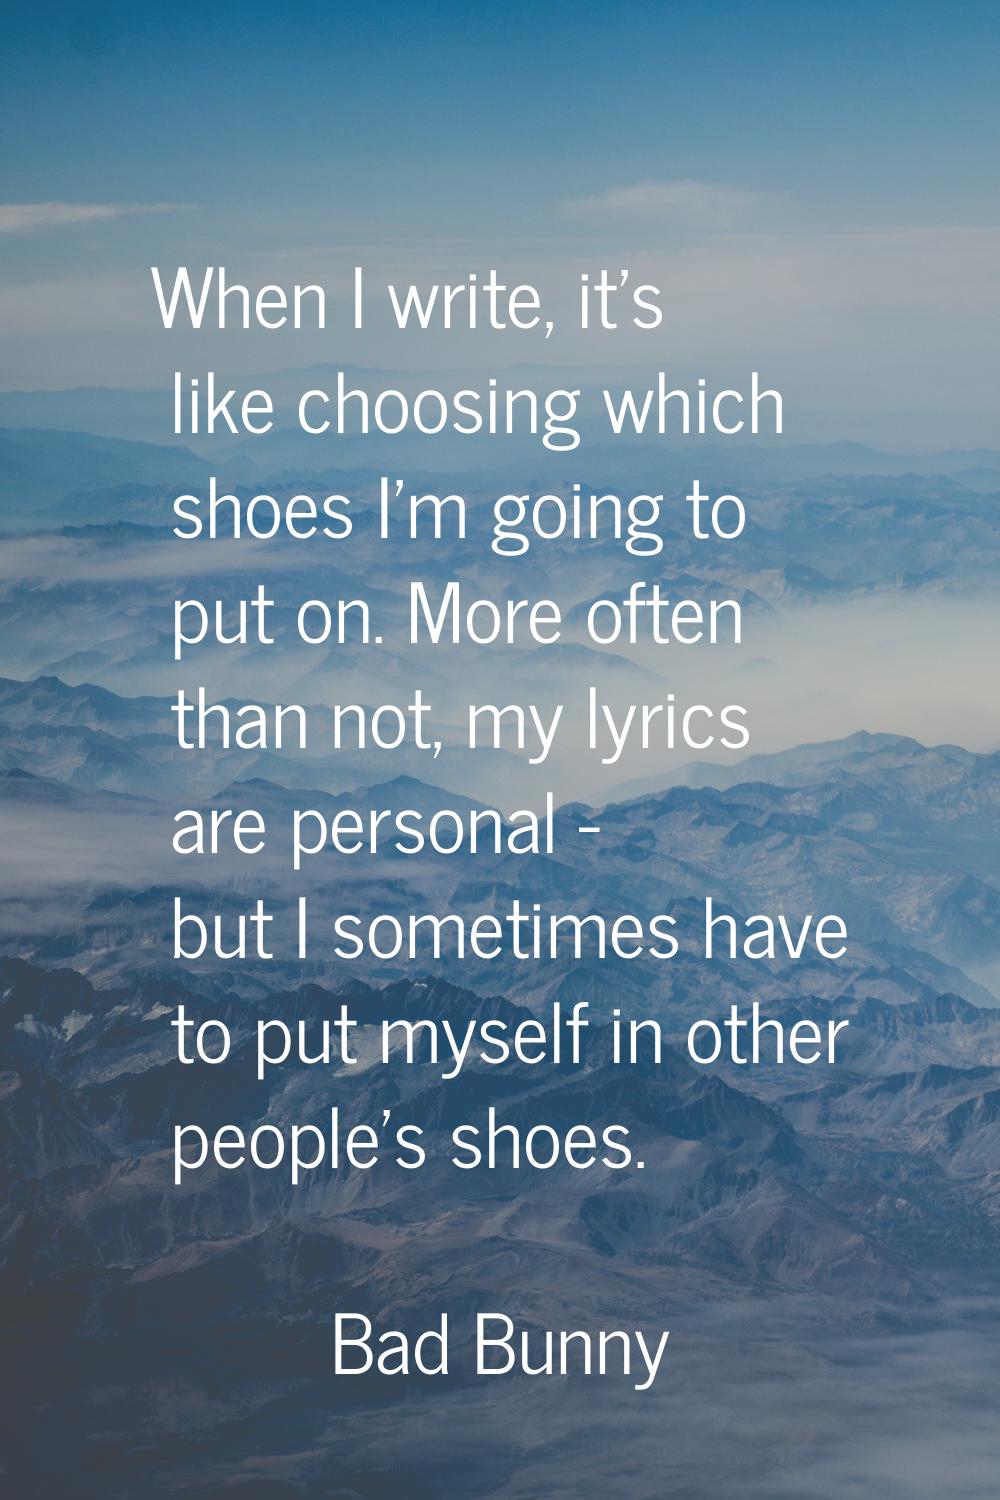 When I write, it's like choosing which shoes I'm going to put on. More often than not, my lyrics ar